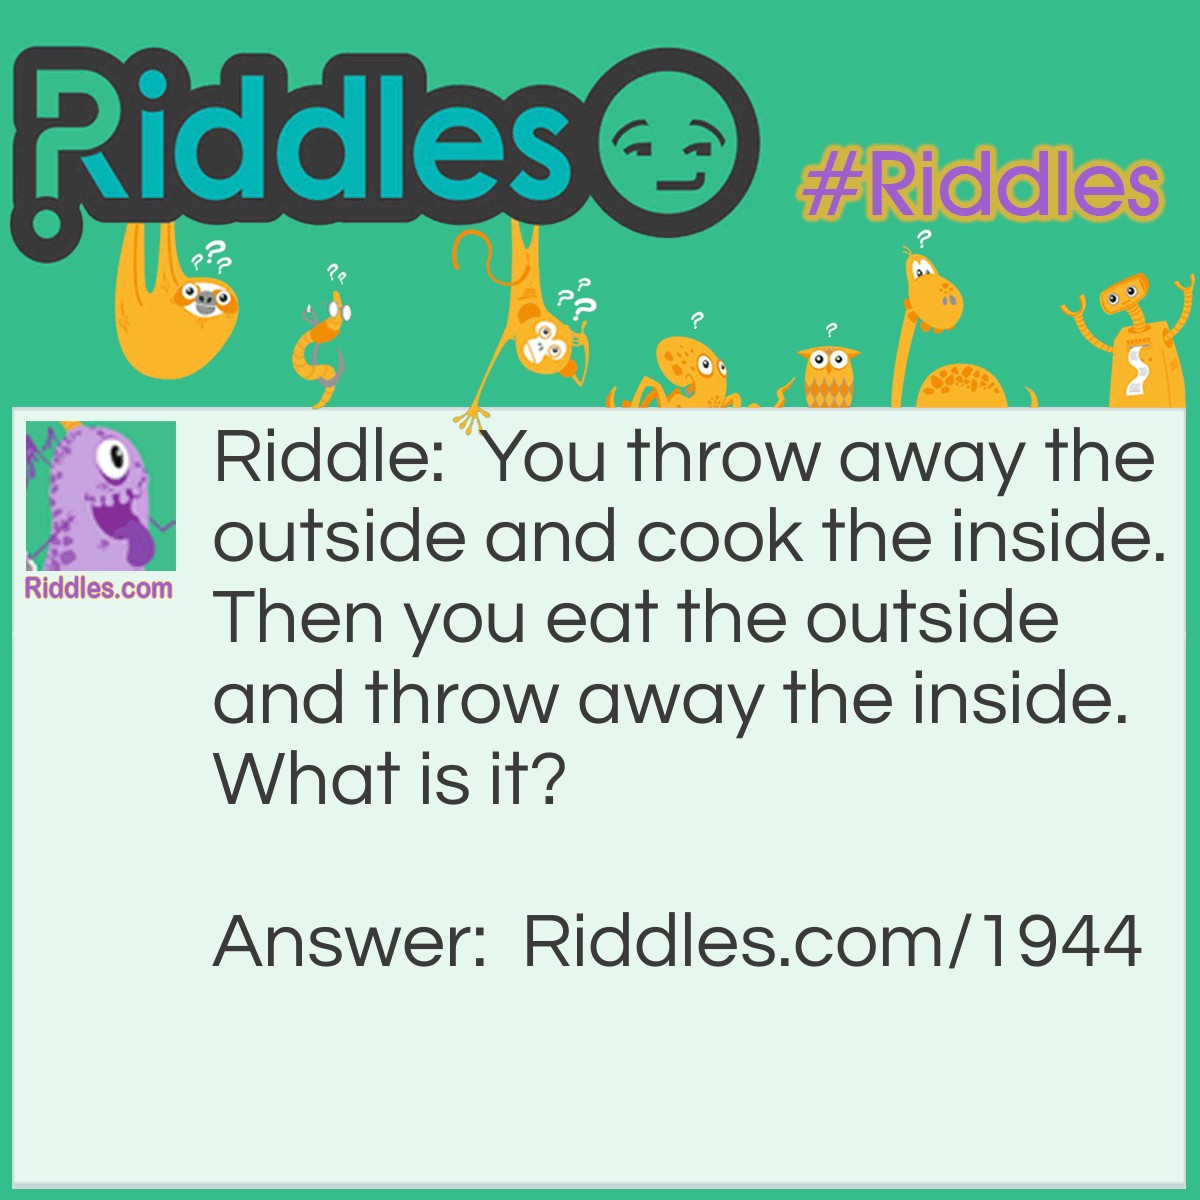 Riddle: You throw away the outside and cook the inside. Then you eat the outside and throw away the inside.
What is it? Answer: Corn.